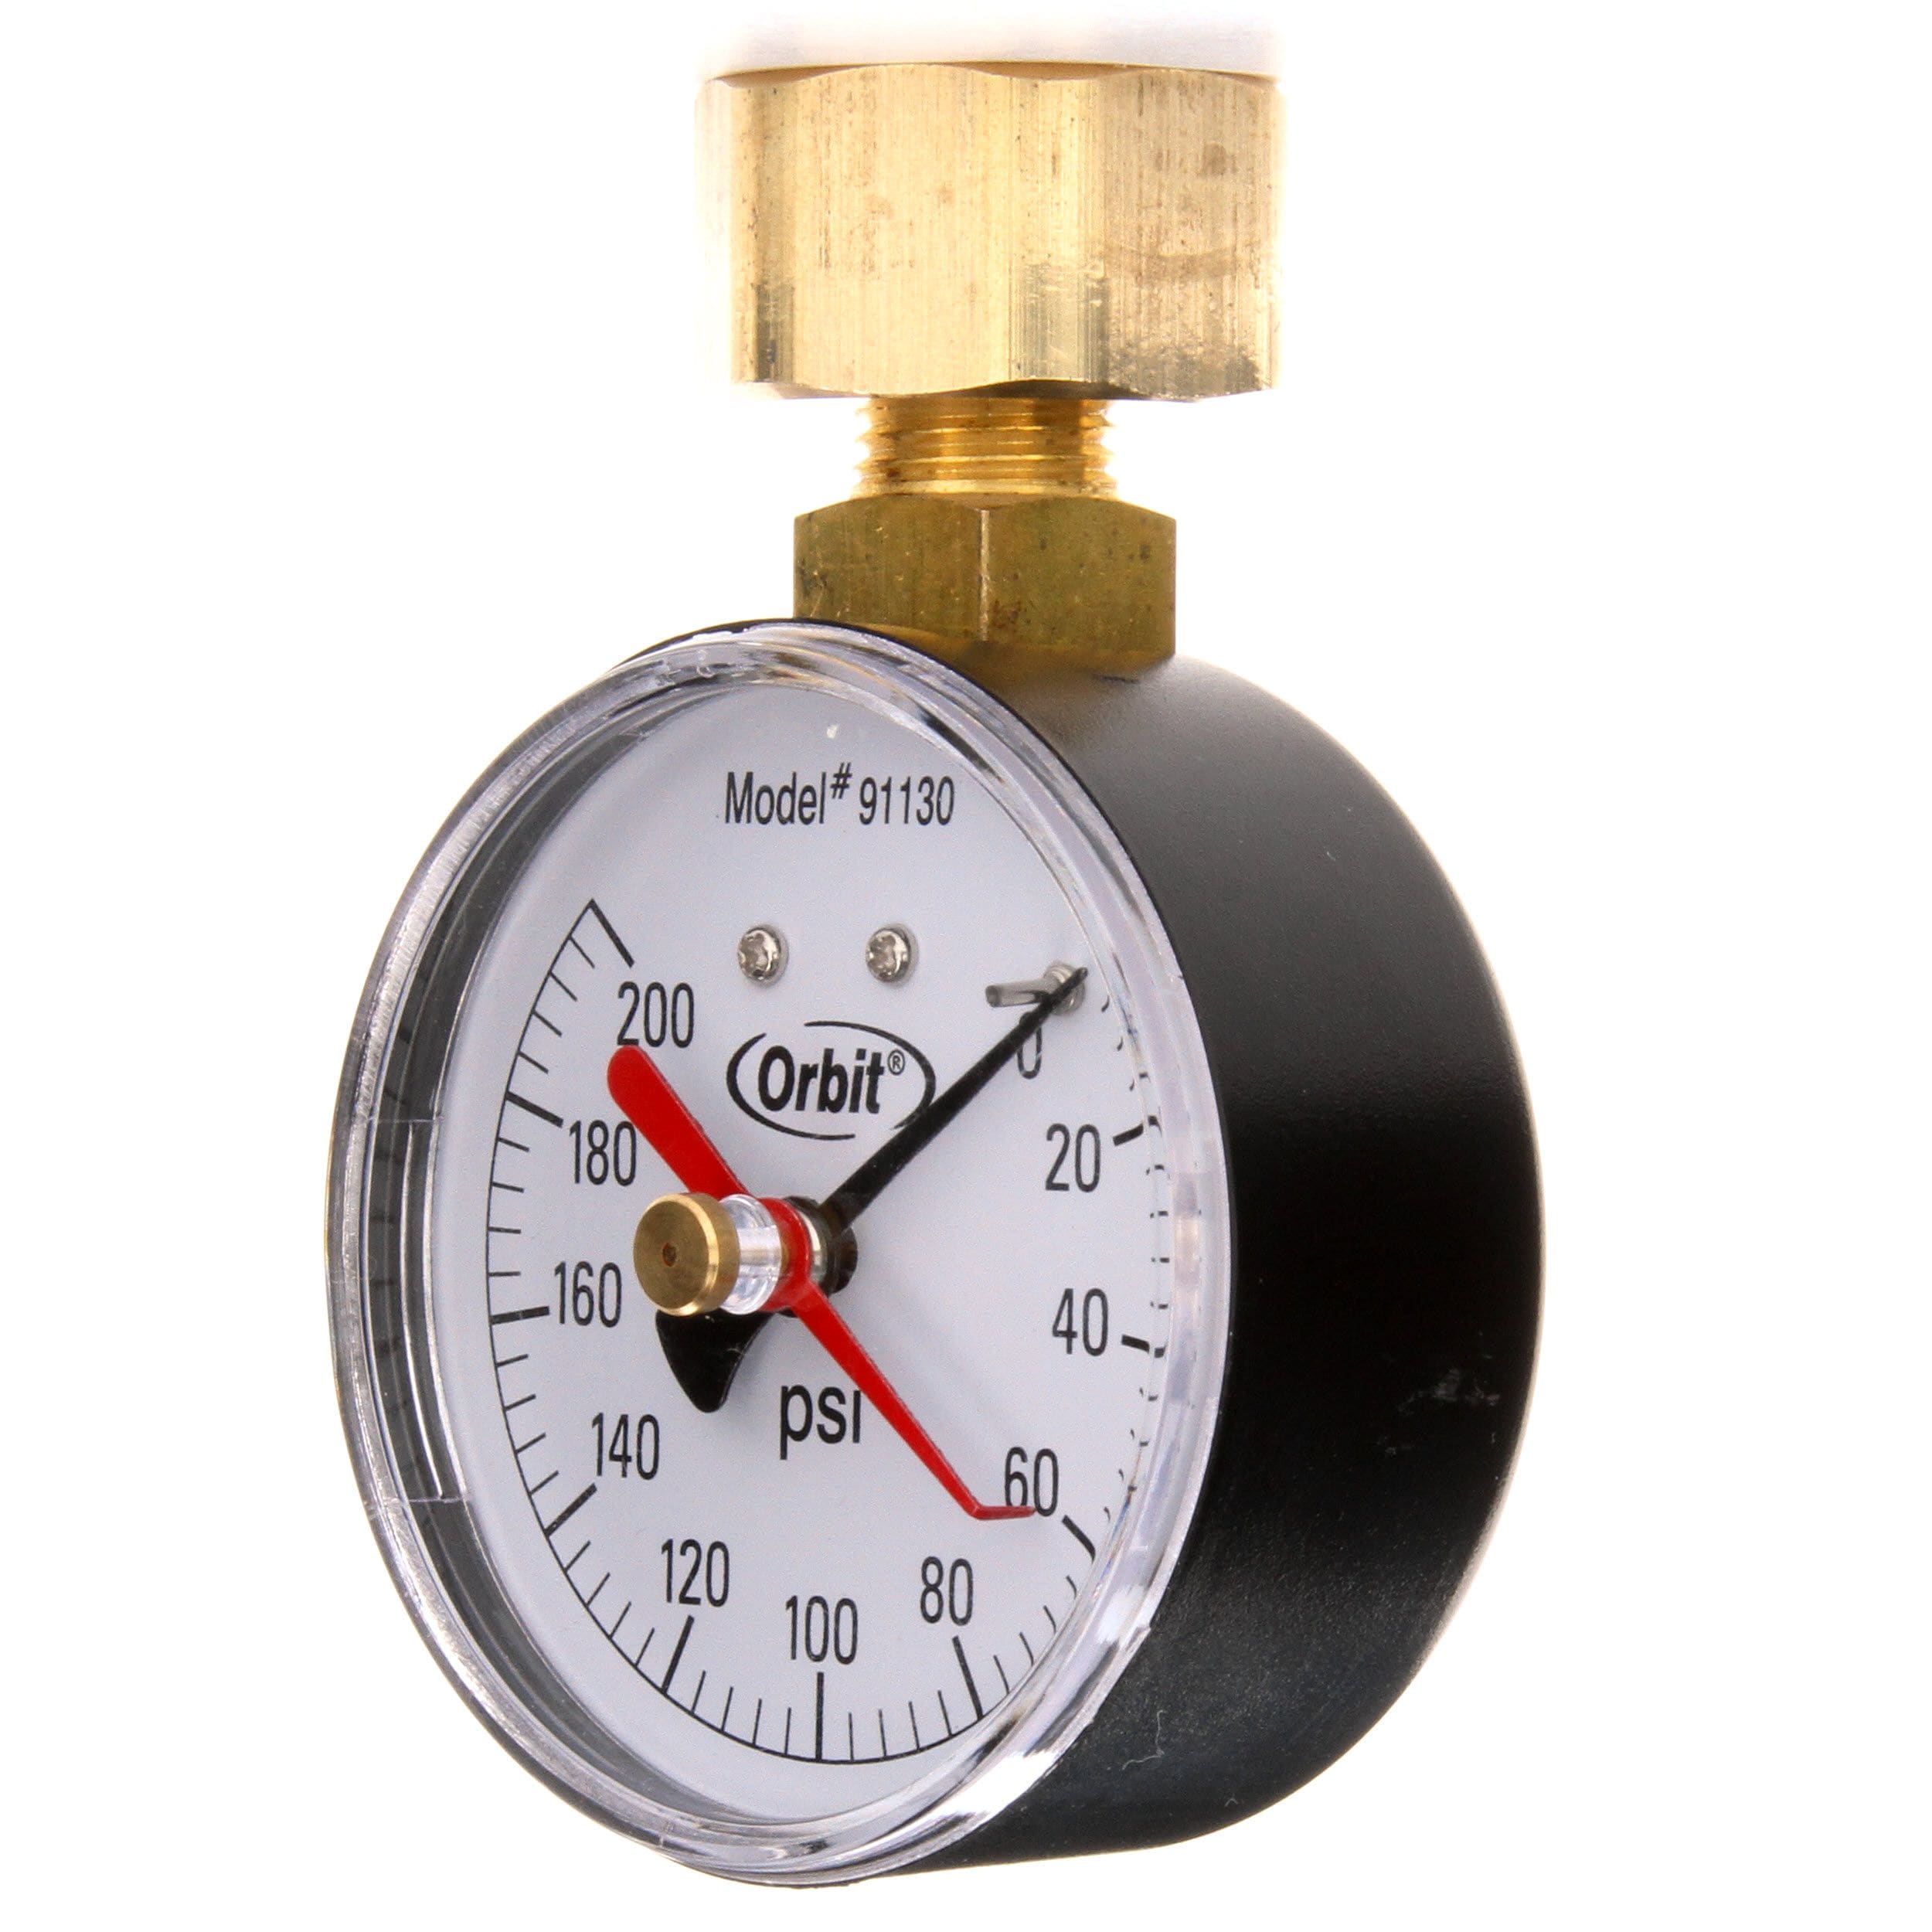 2 packages. Free shipping 200 psi Details about   Orbit Pressure Gauge  3/4 in 